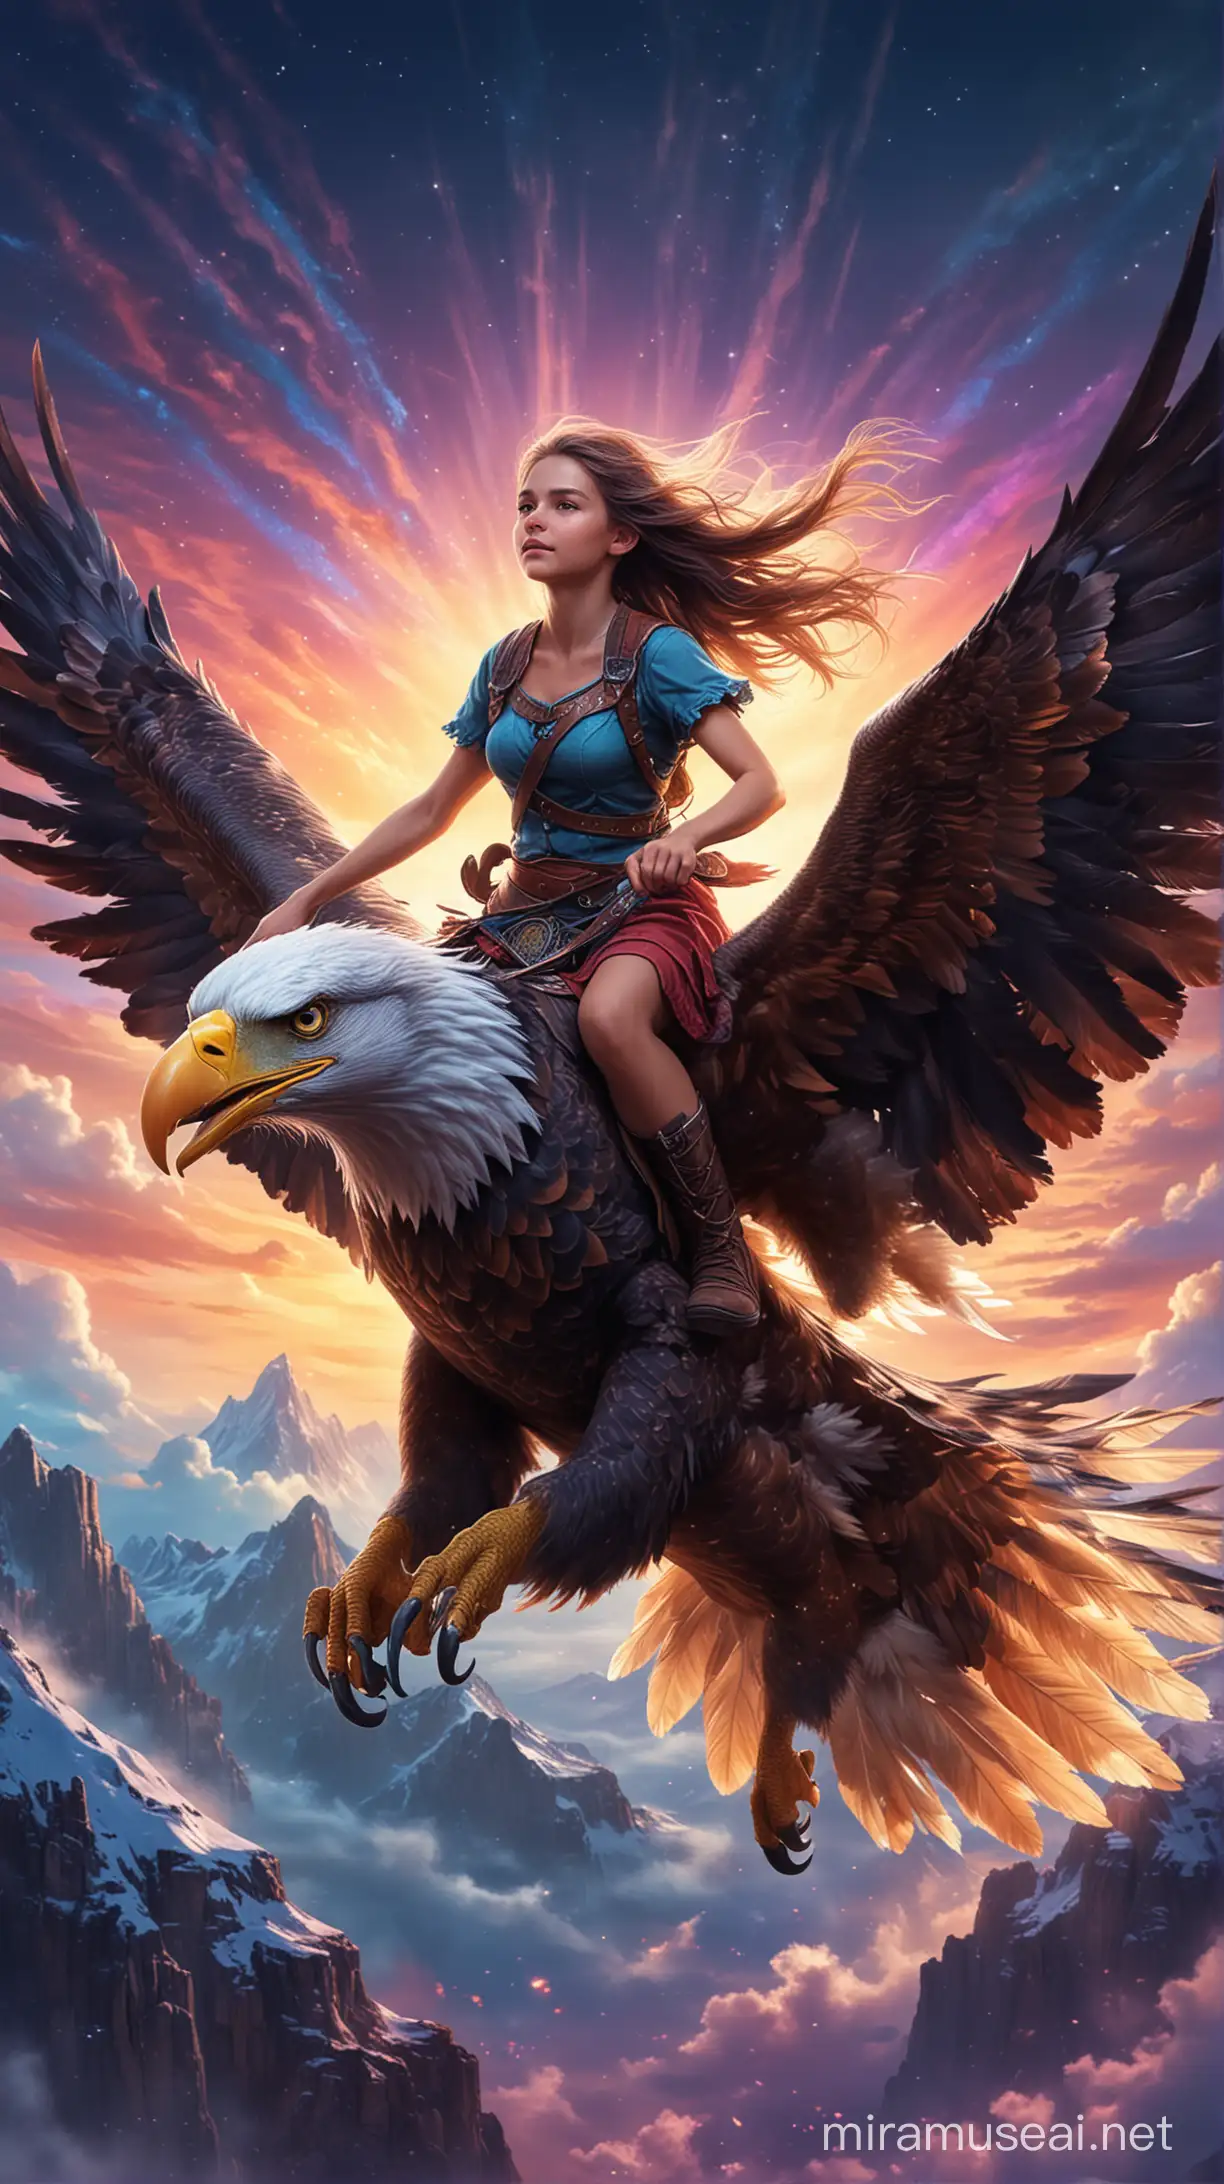 Girl Riding Magical Flying Eagle in Vibrant Colors